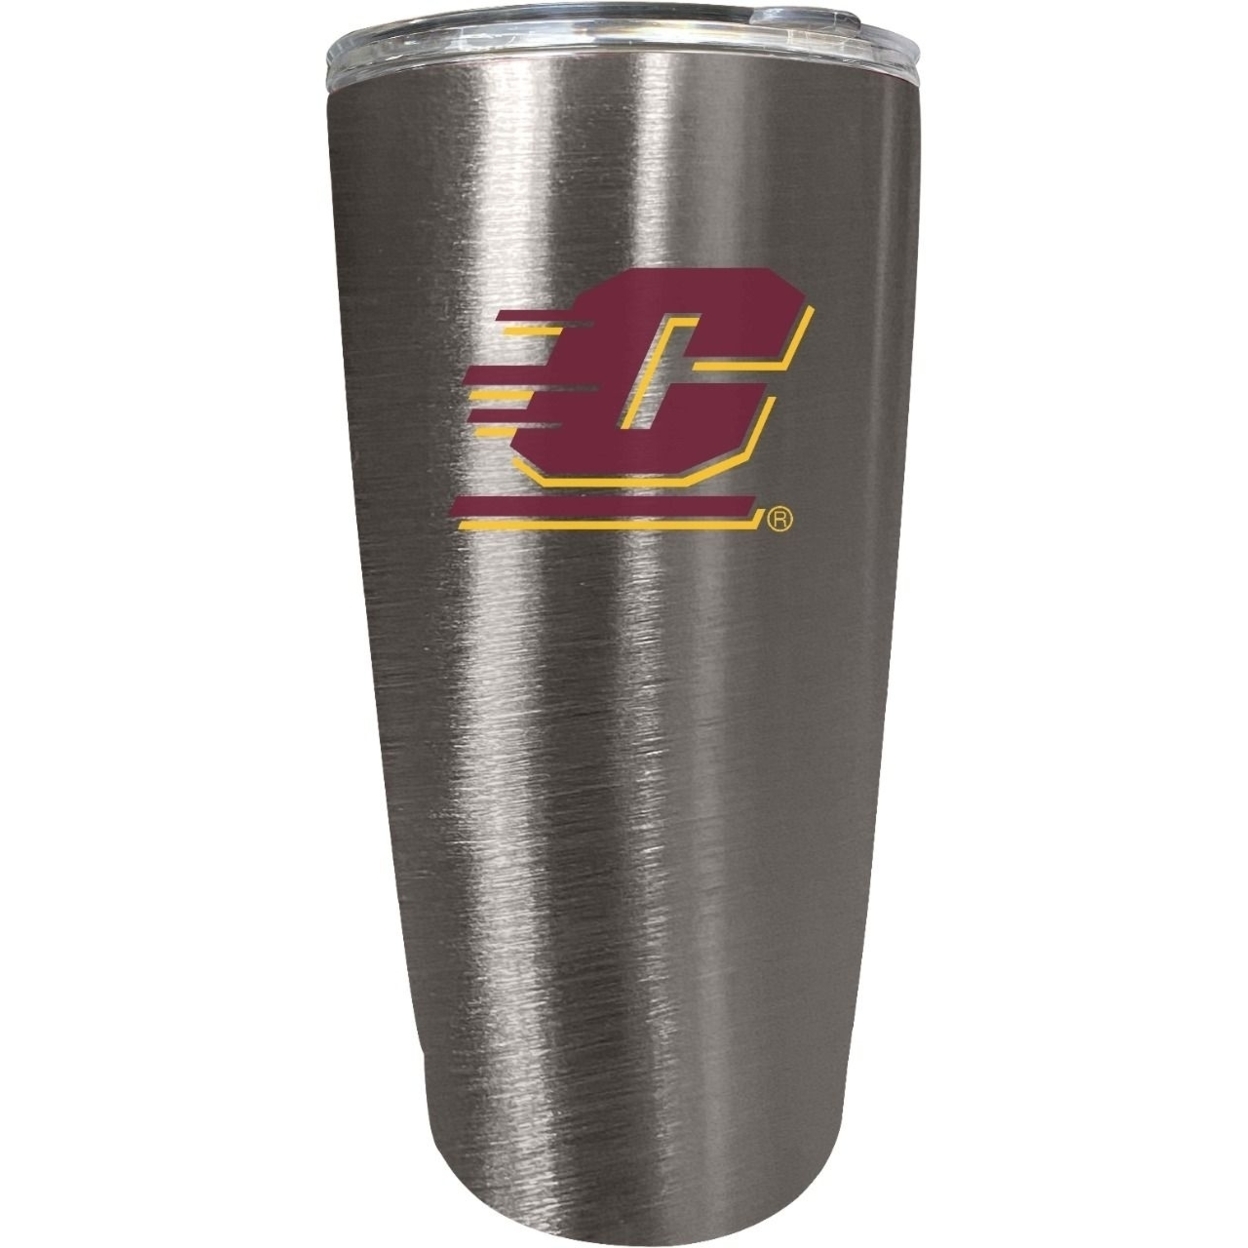 Central Michigan University 16 Oz Insulated Stainless Steel Tumbler Colorless